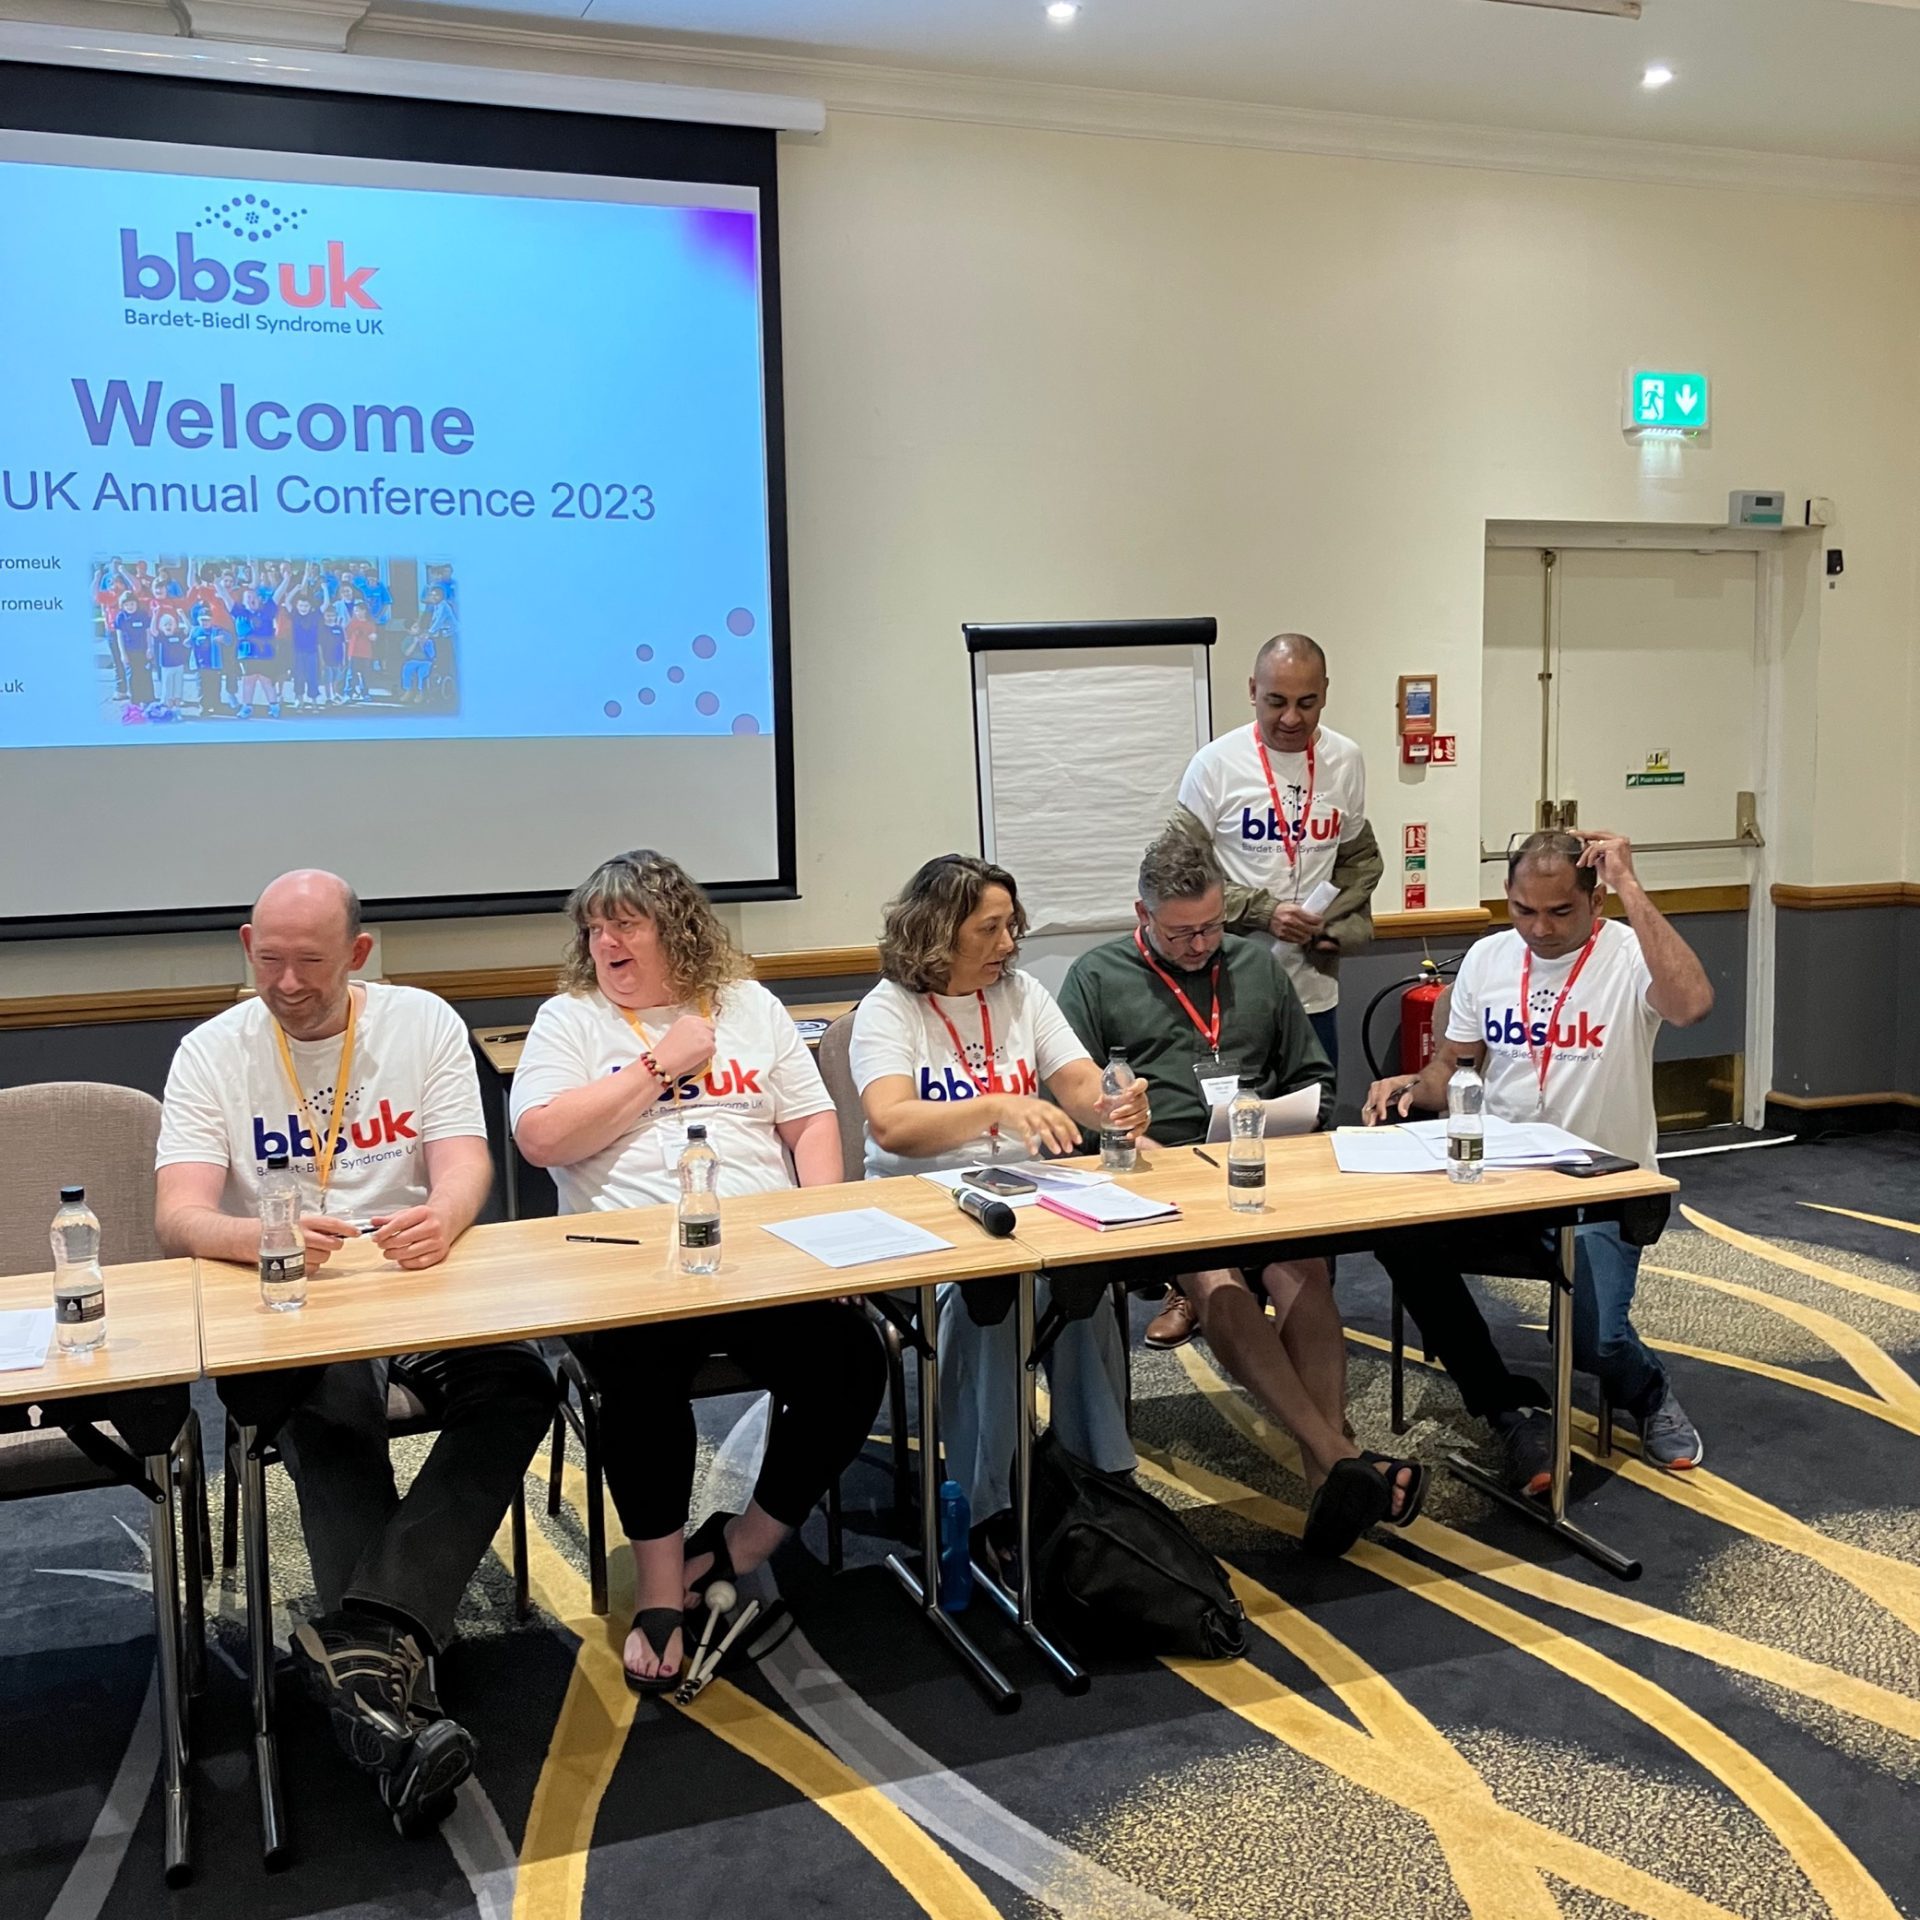 The BBS UK trustees sat at a table with a projector behind them. They are wearing BBS UK t-shirts.